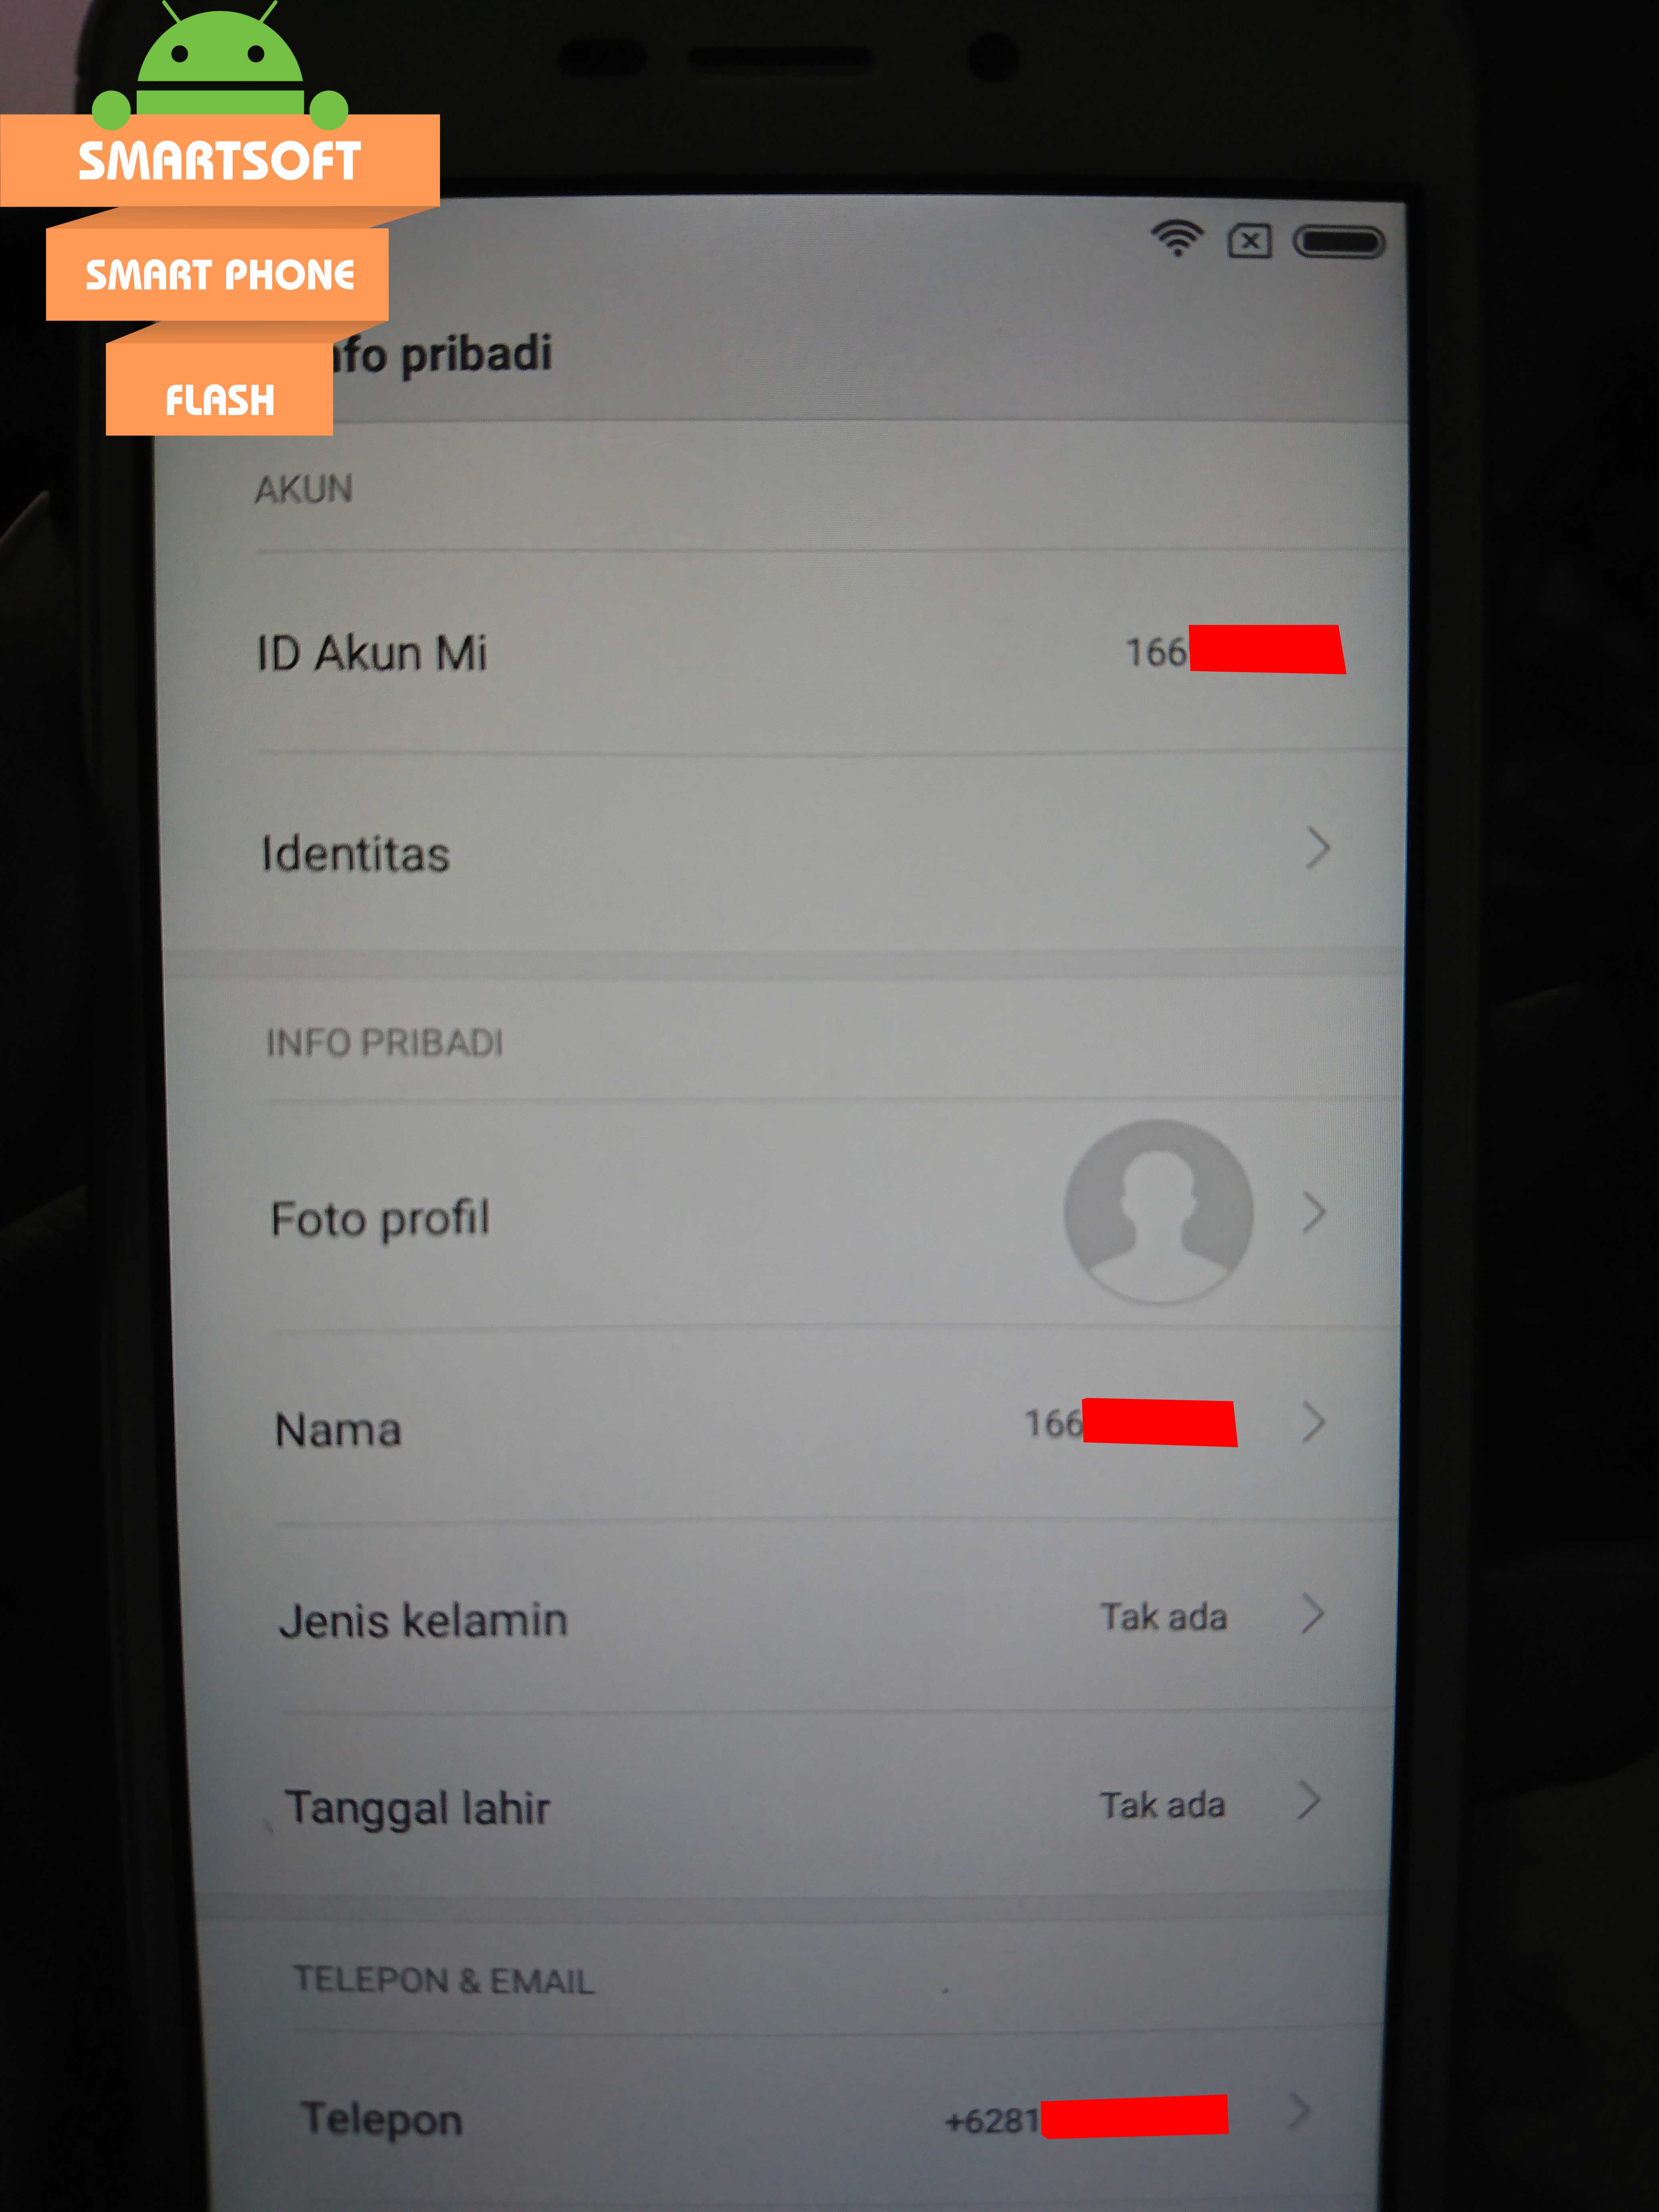 Remove Mi account Redmi 4a from Old user. No box, no root, no UBL, just EDL!!!
